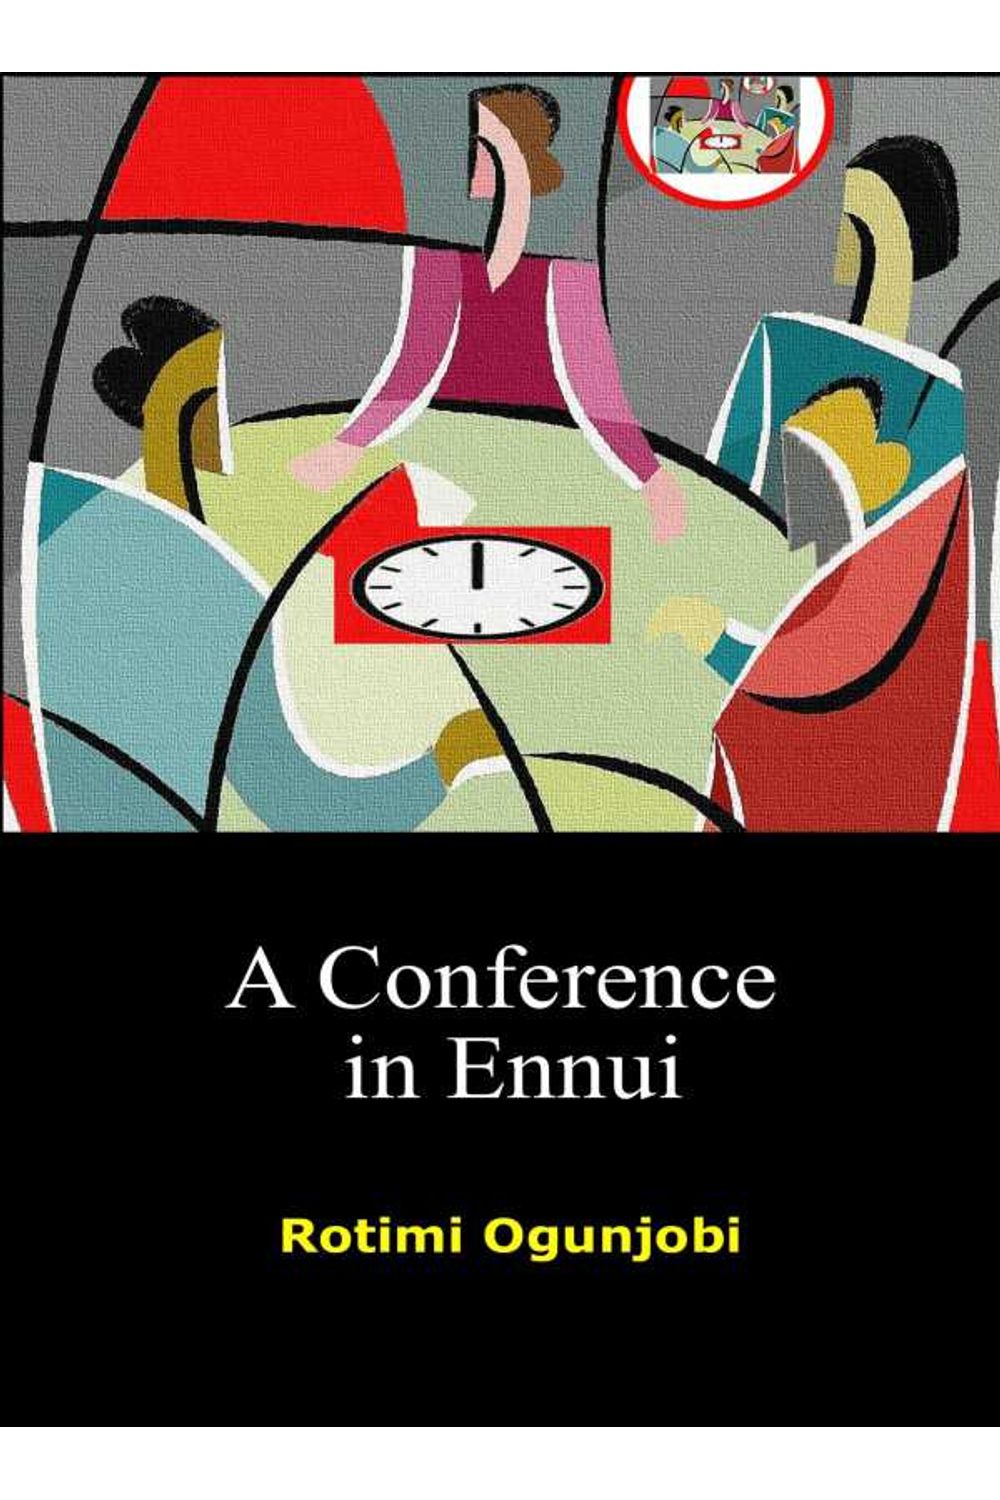 bw-a-conference-in-ennui-xceedia-publishing-9783955775384